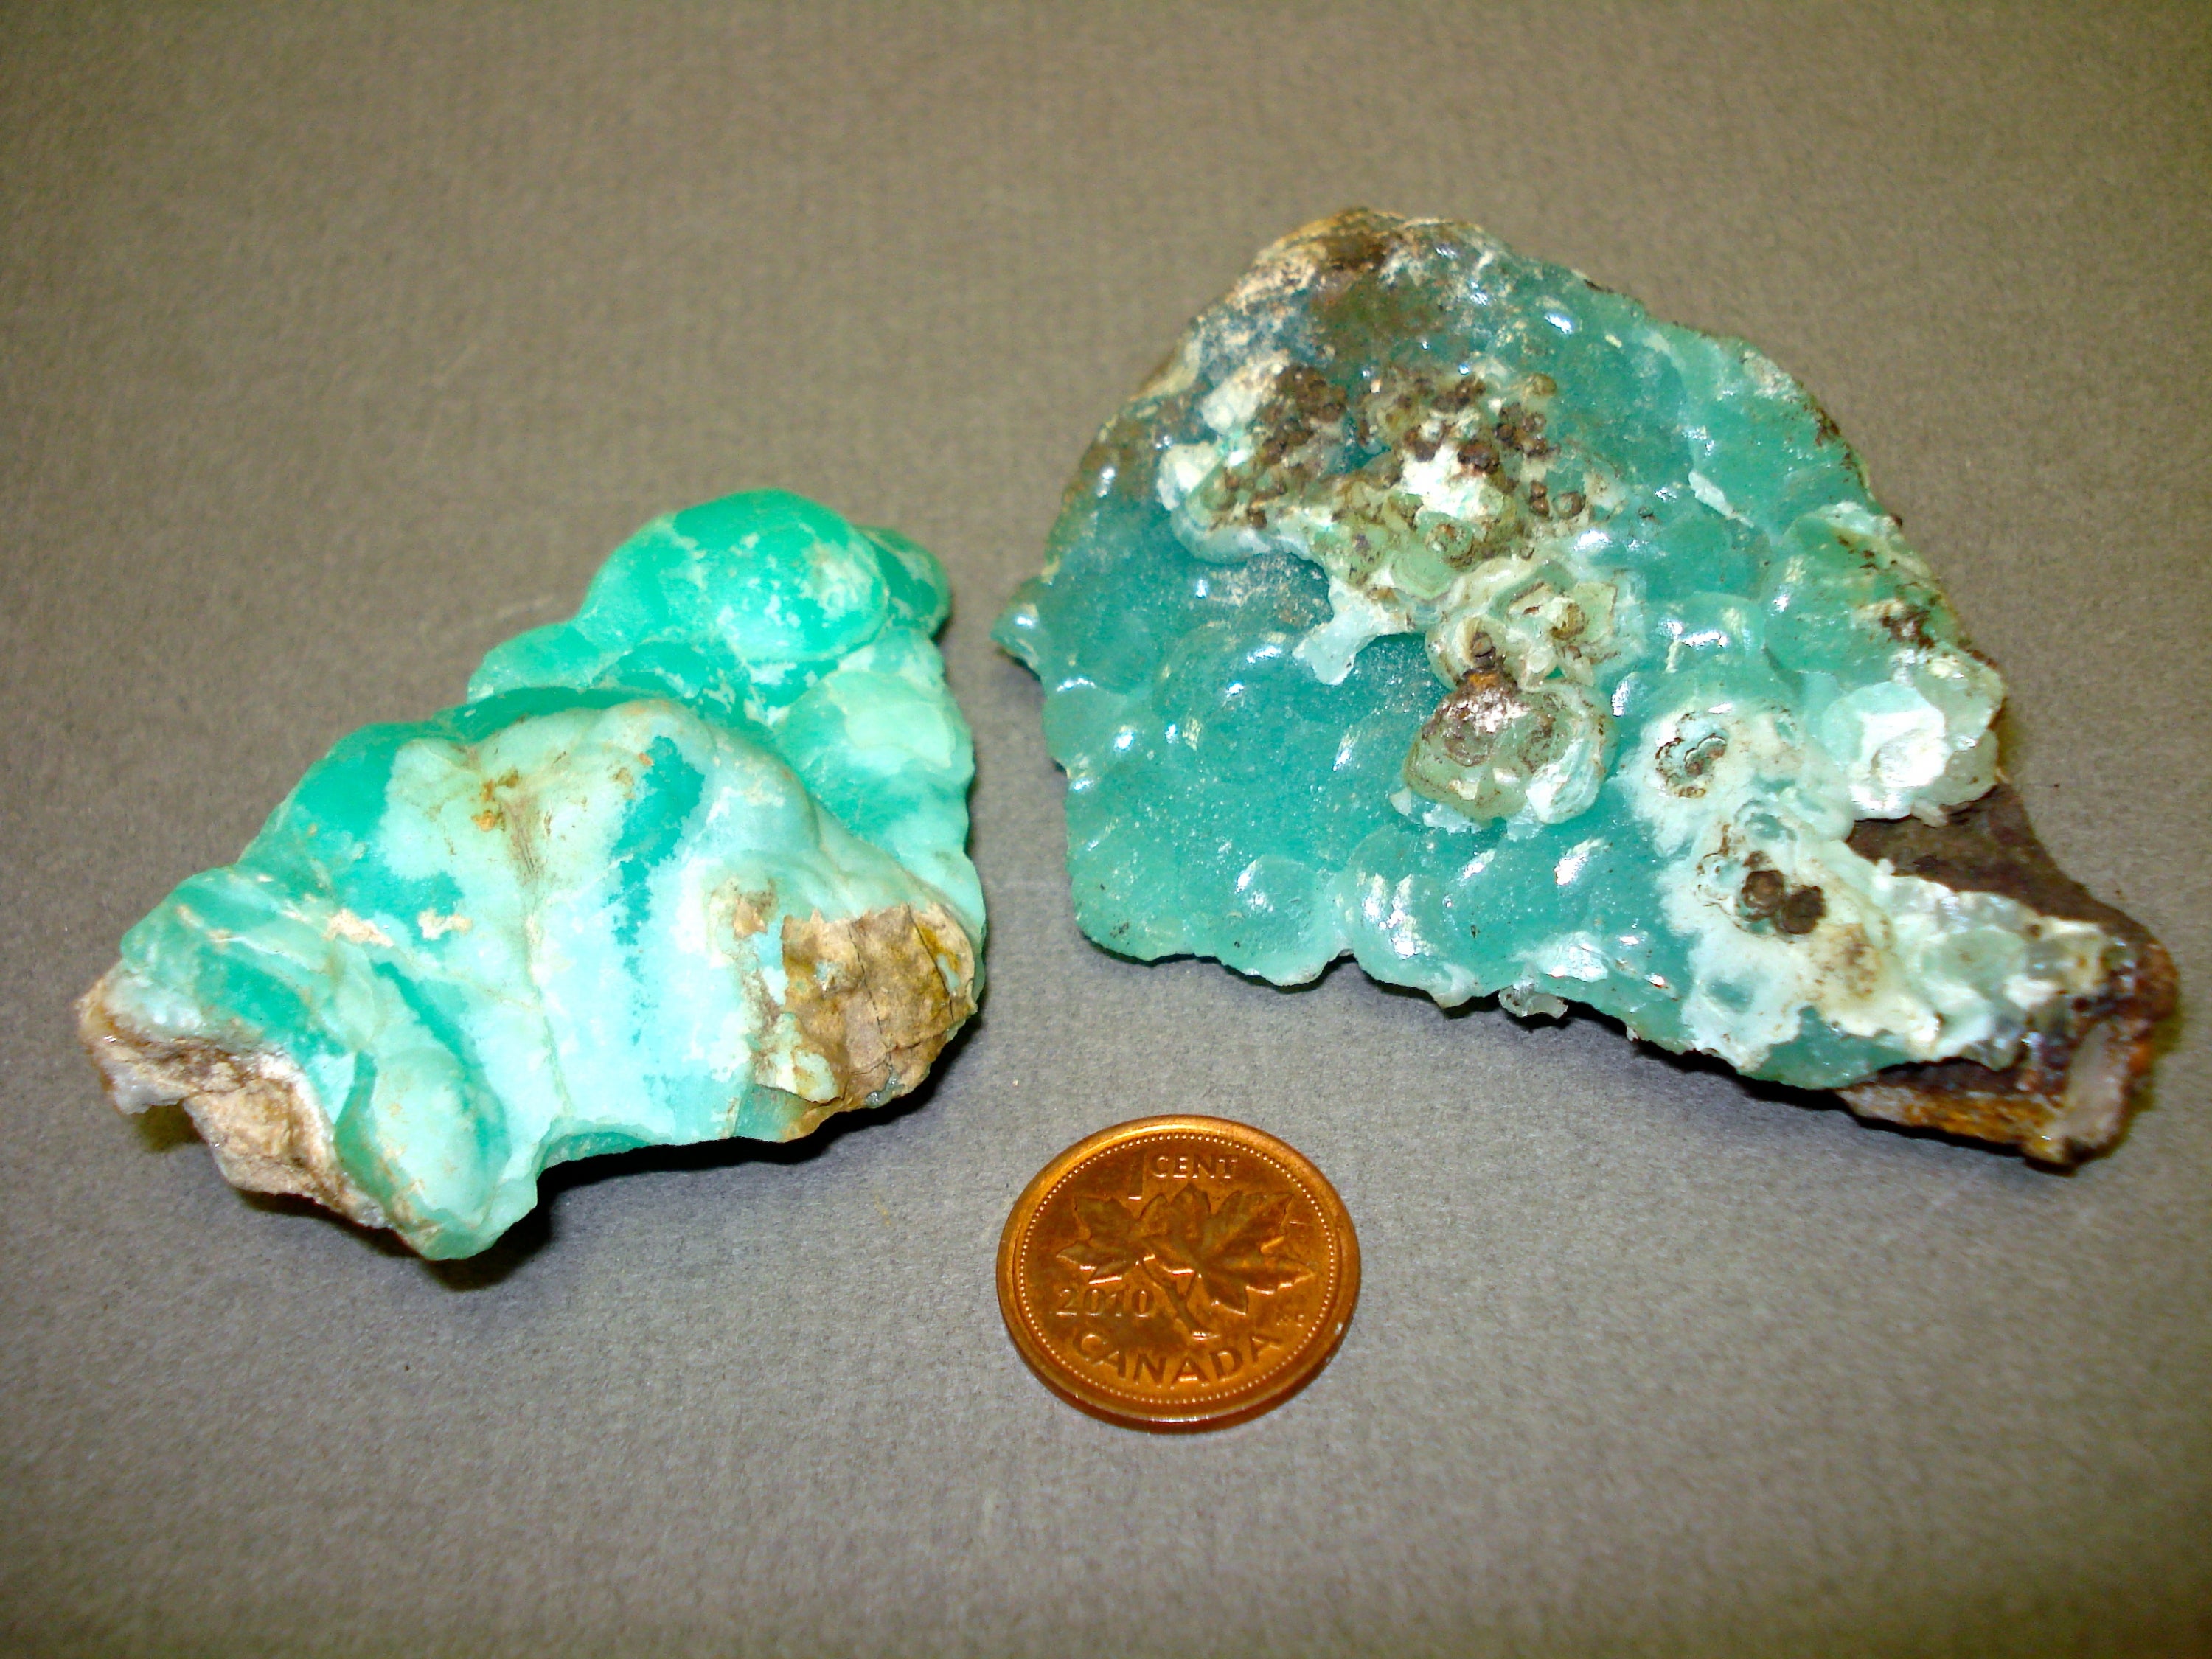 a couple of pieces of smithsonite next to a penny for size comparison